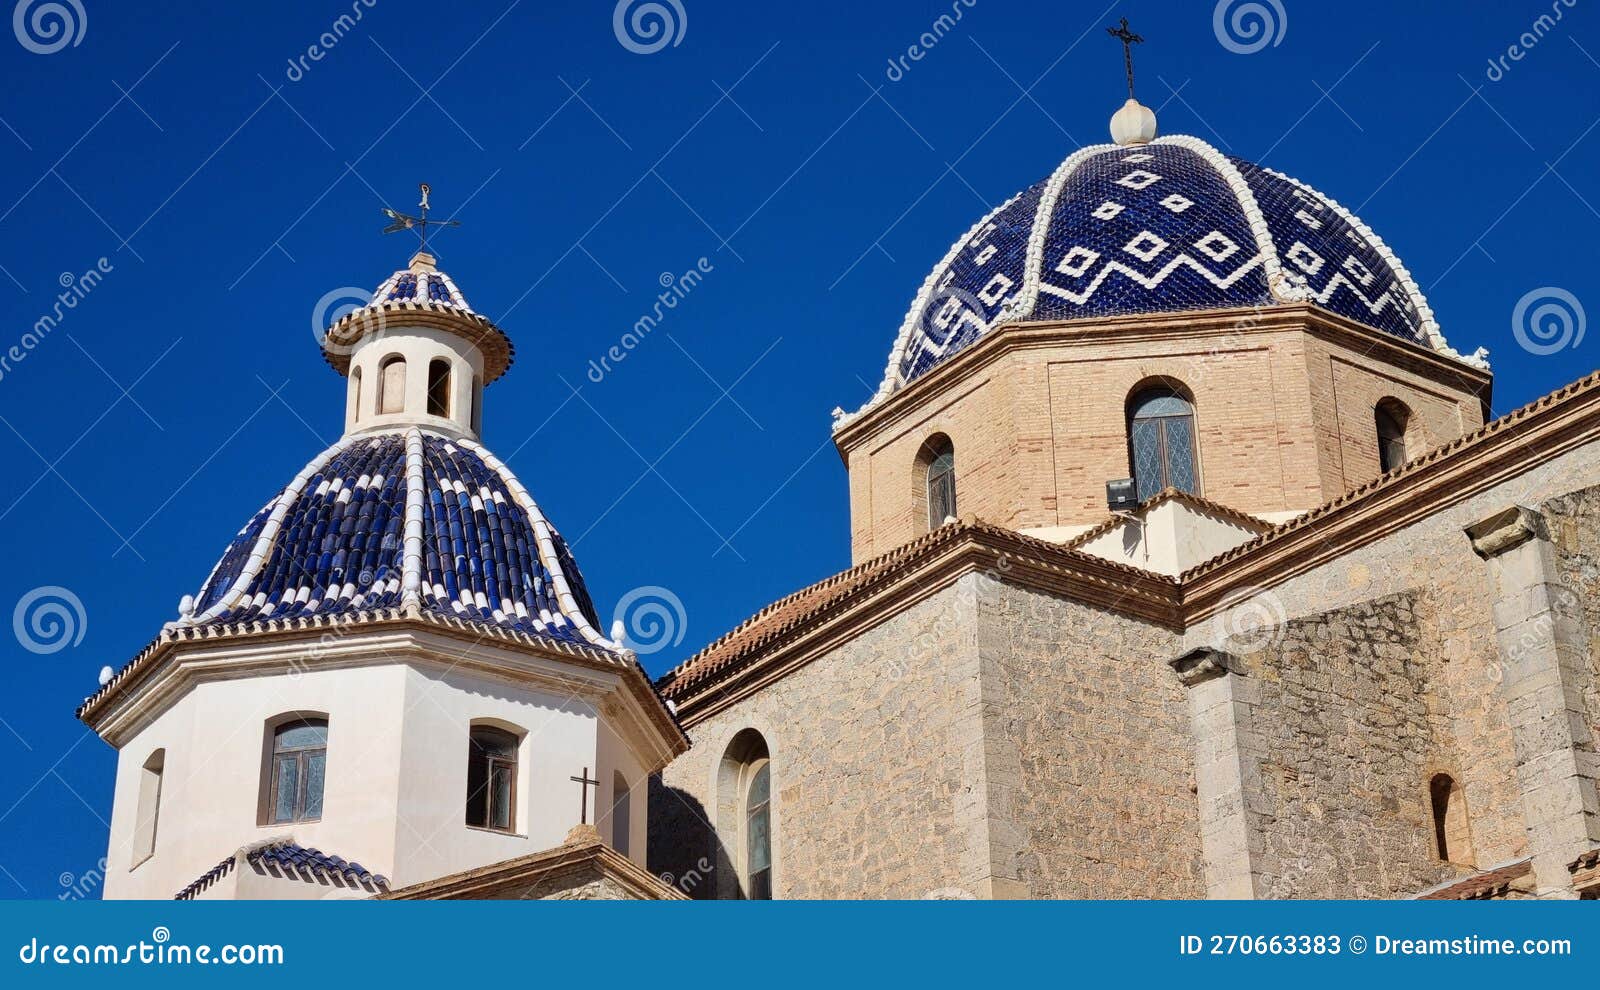 virgin of the consol church in altea, spain
 against a backdrop of the blue sky